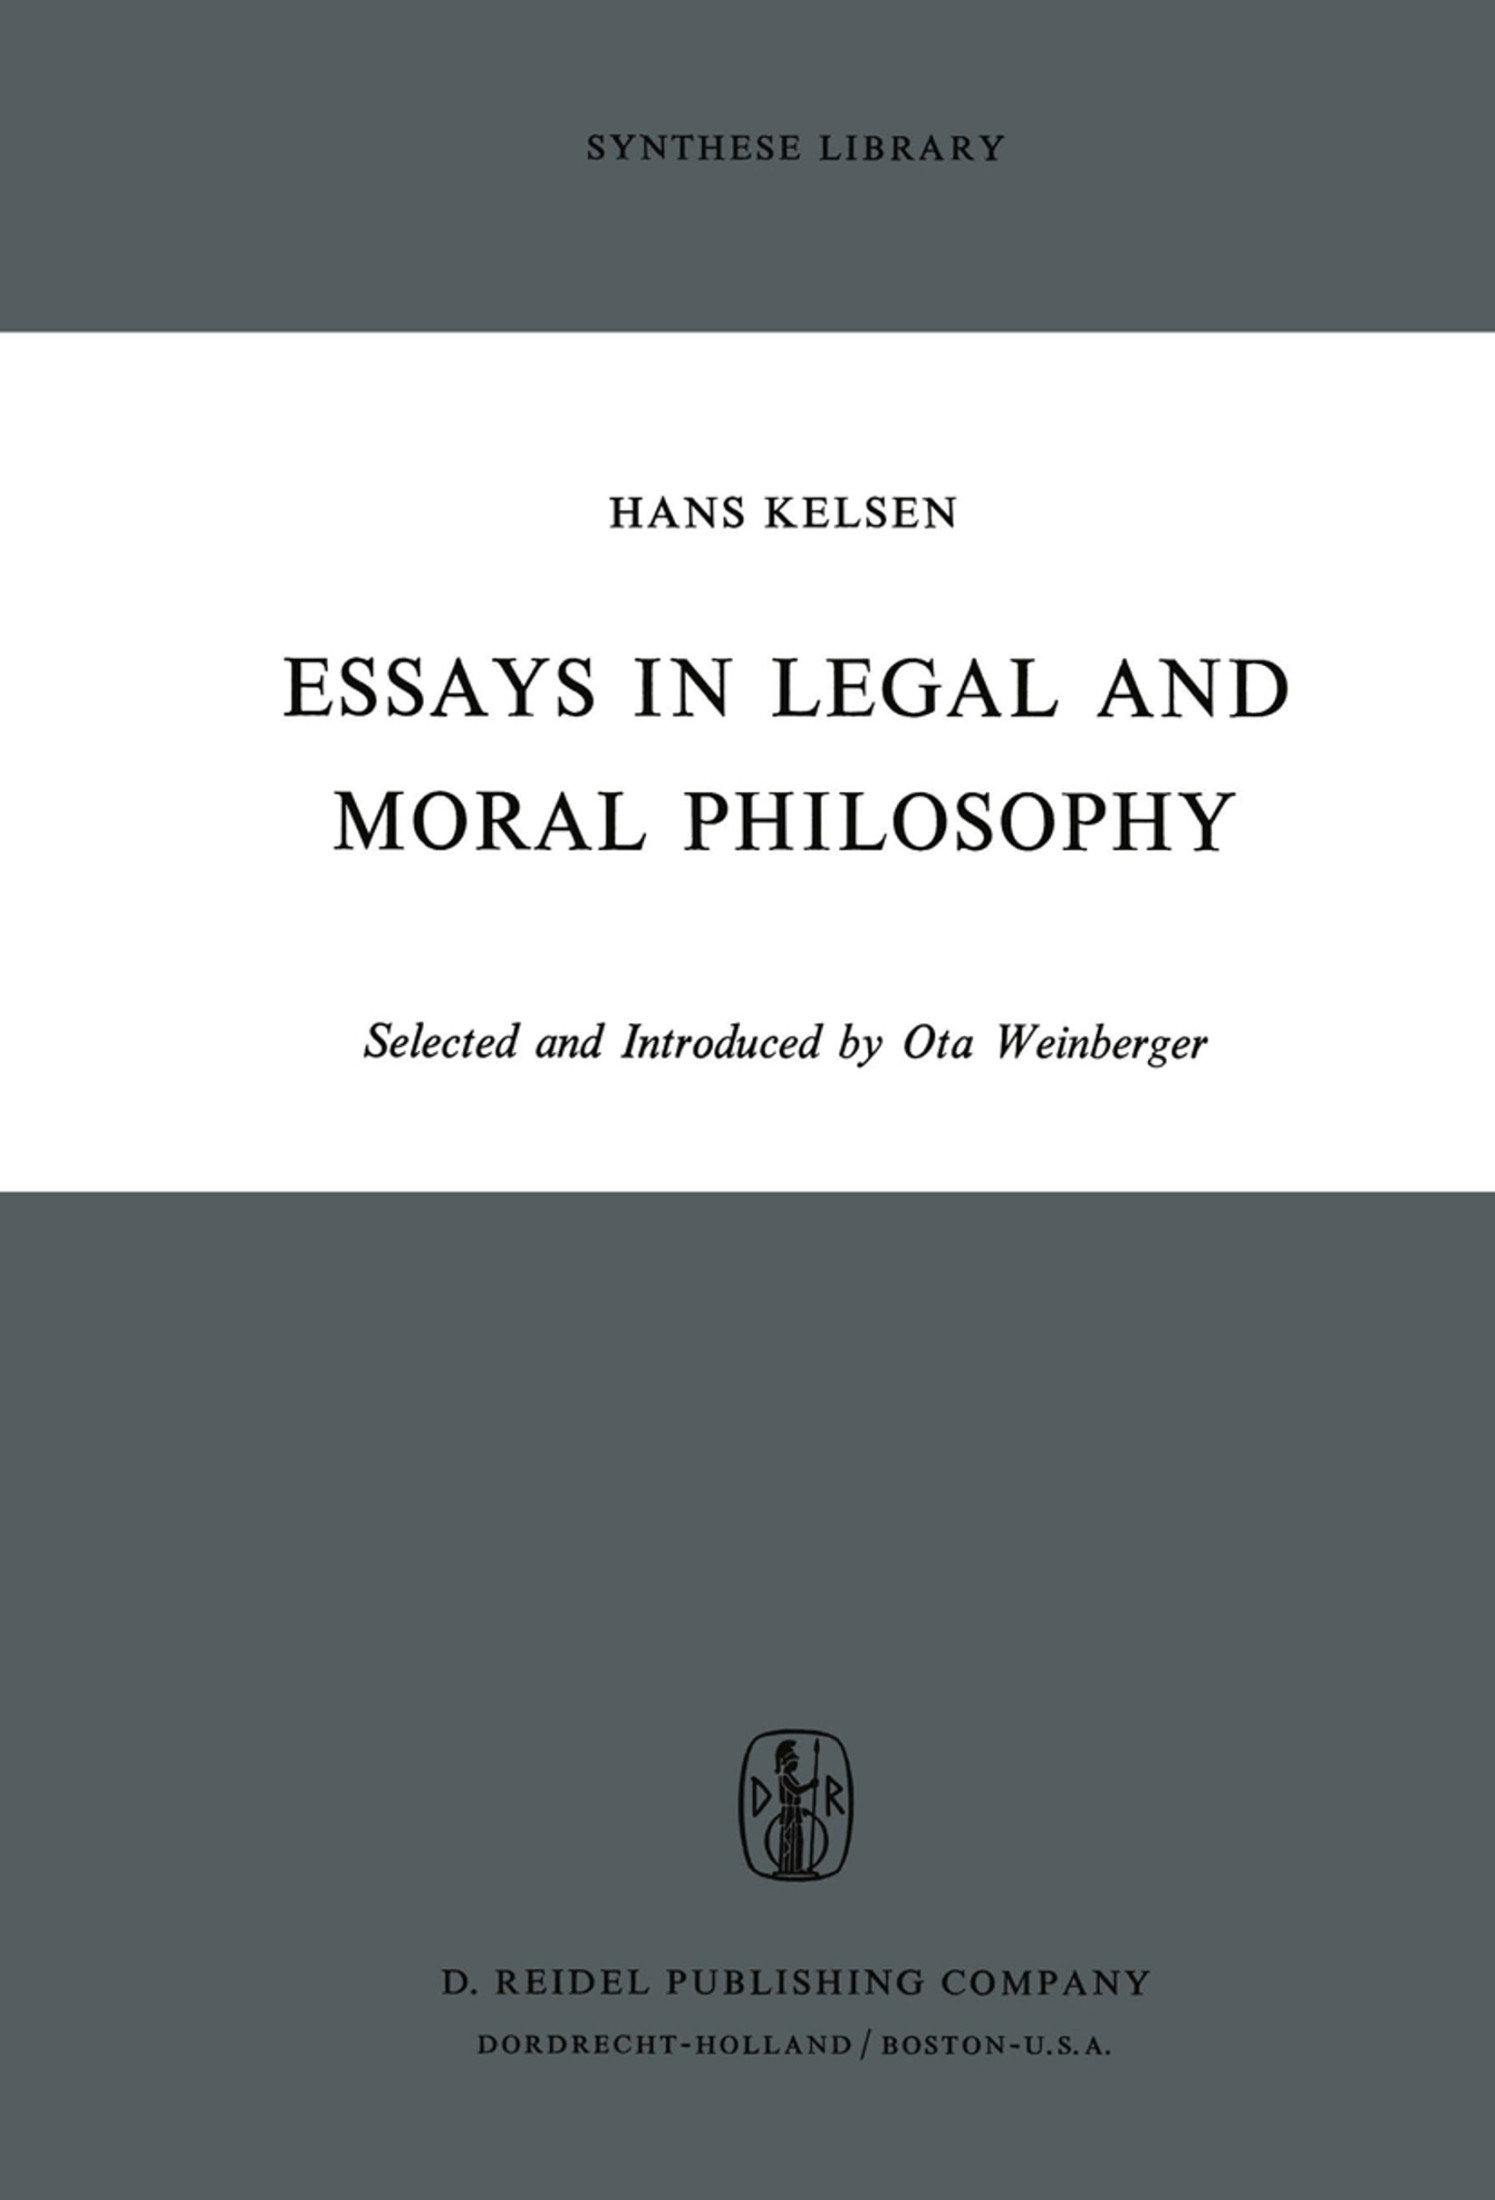 Essays in Legal and Moral Philosophy